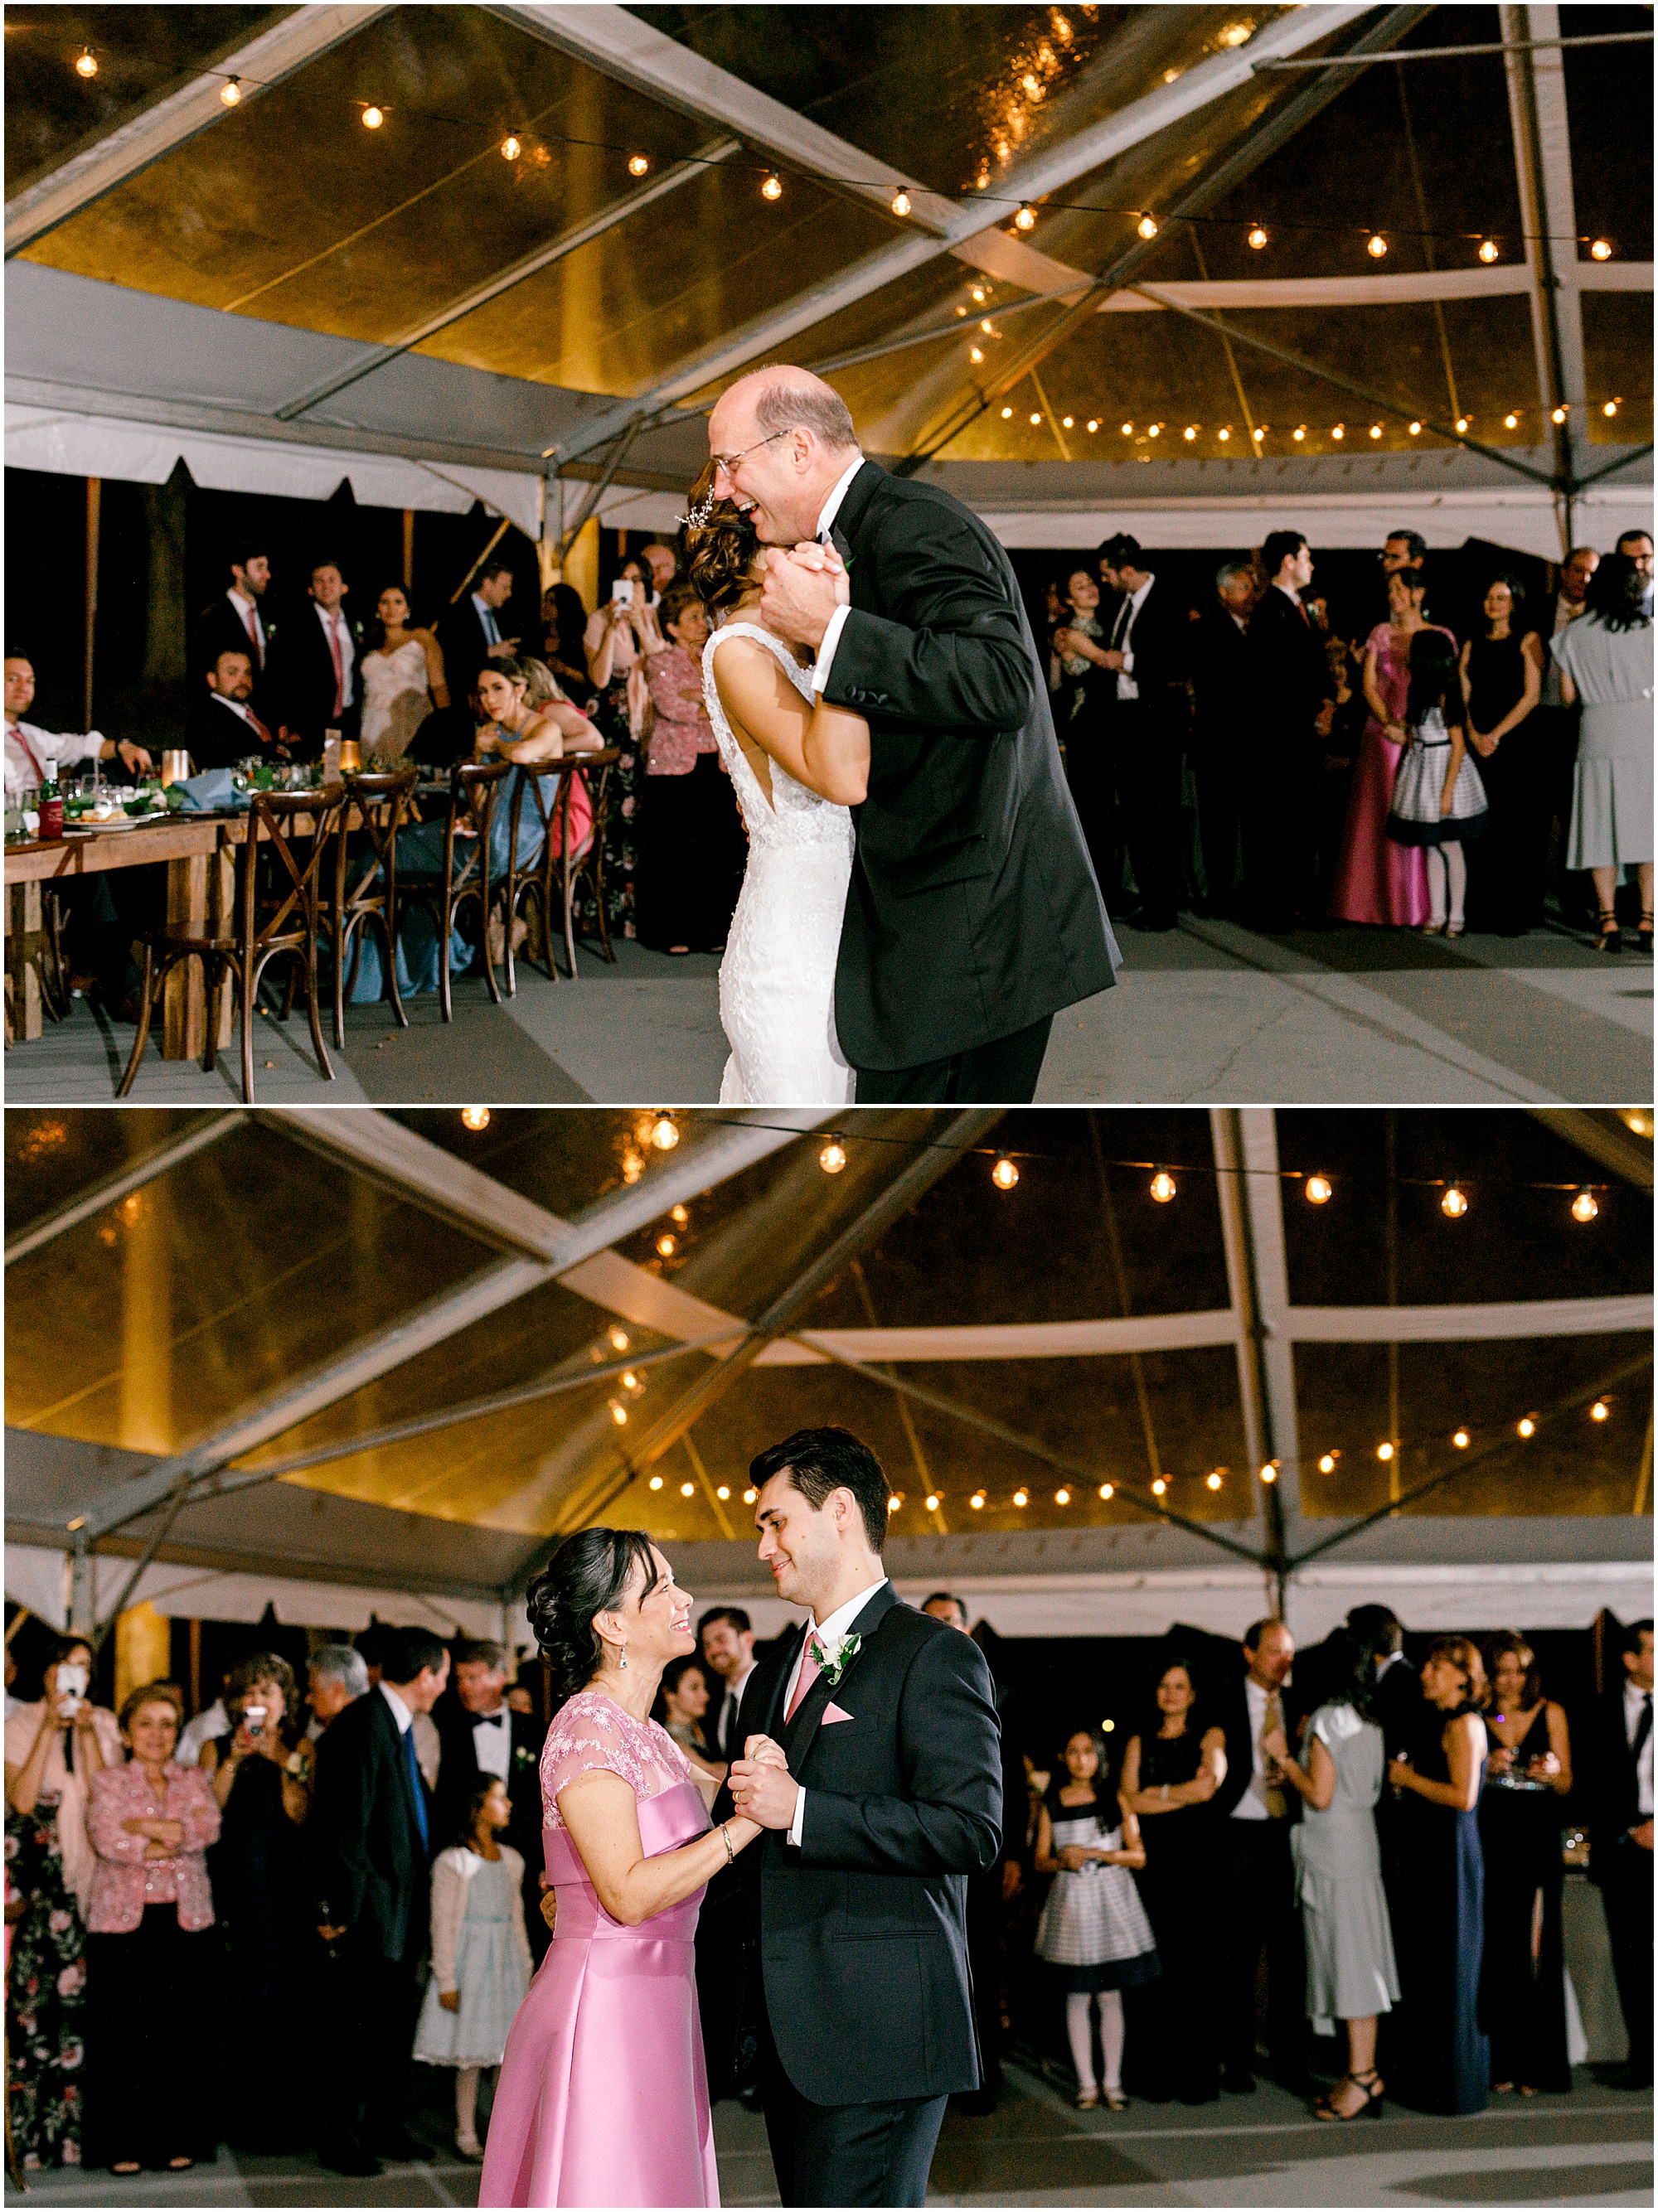 Bride dancing with her father and groom dancing with his mother